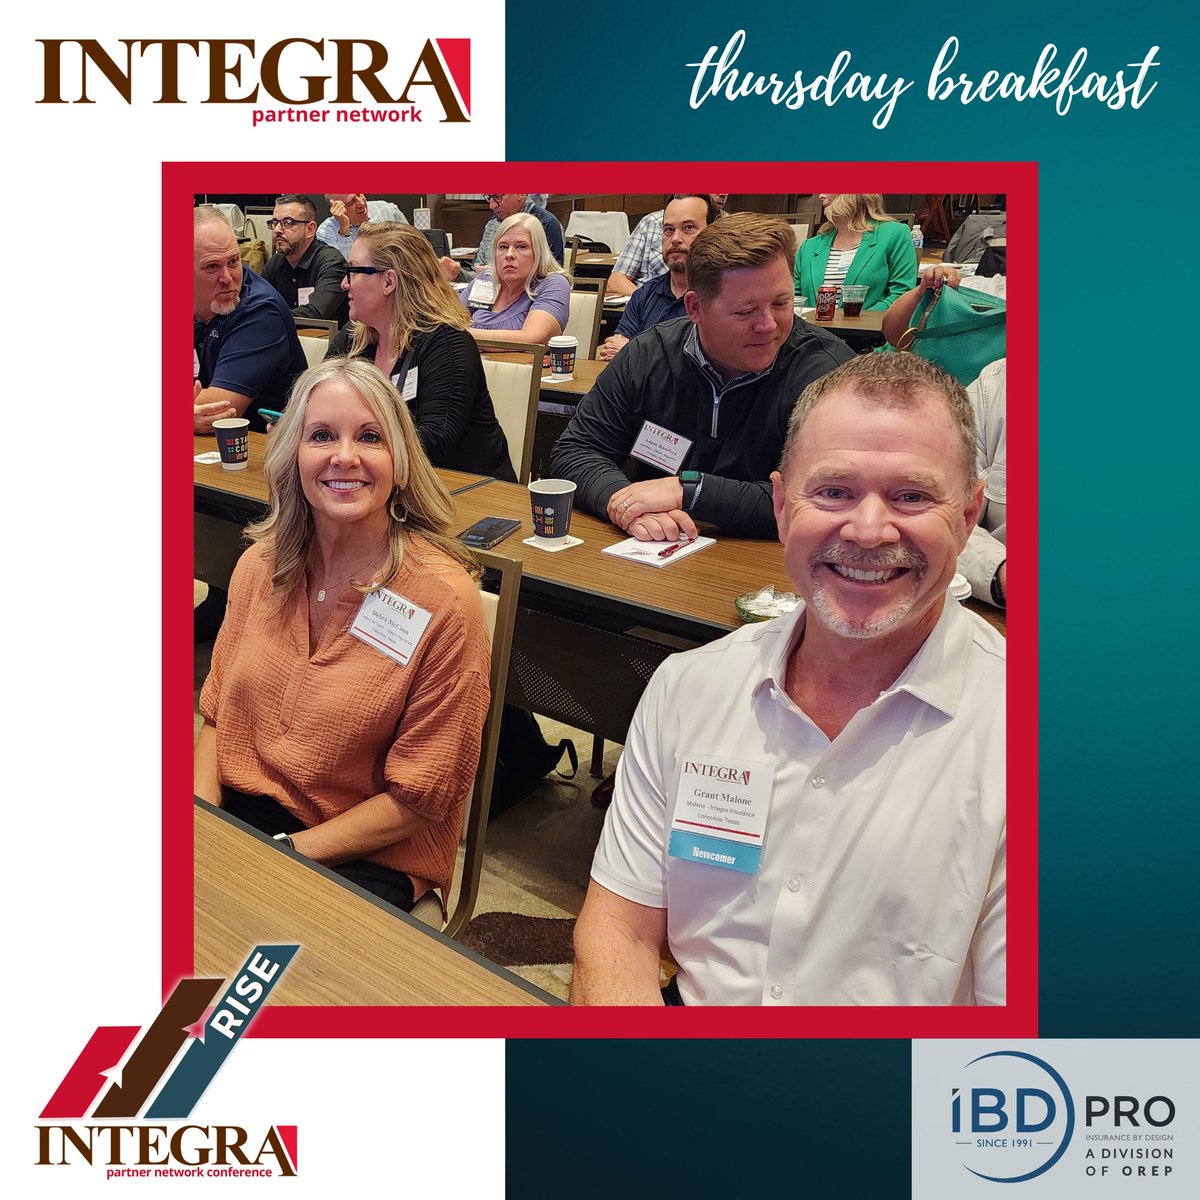 Thank you to IBD Pro, a Division of OREP for being a Gold Sponsor of the Integra Partner Network Conference and fueling our networking breakfast this morning.

#insuranceagent #insuranceagent #independentagency #independentagent #integrainspires #findyourway #agencygroup